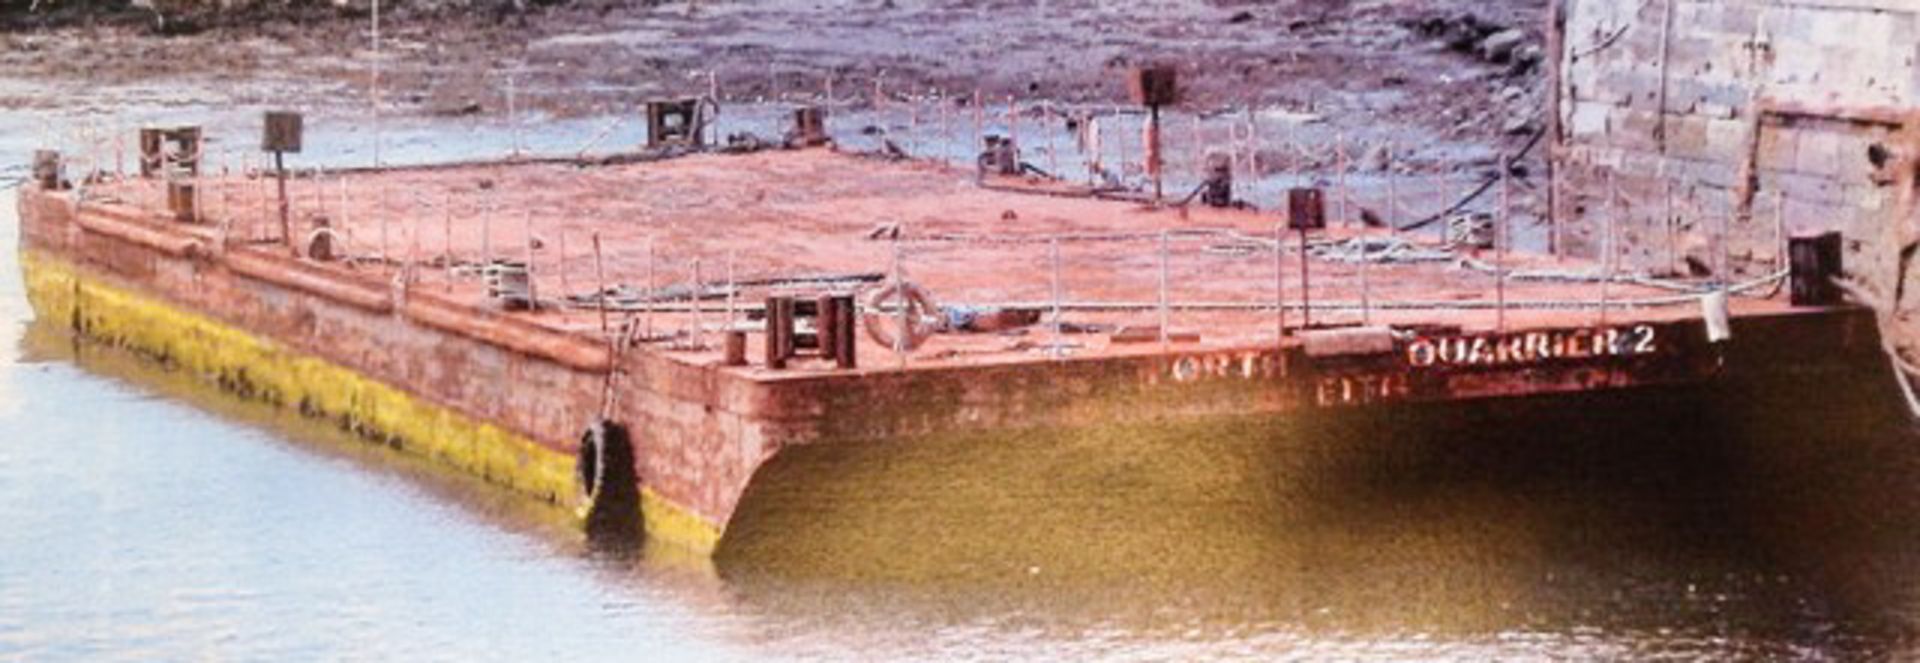 1988 STEEL DUMB BARGE (FORTH QUARRIER 2) L - 36.5M, WIDTH - 12.2M, D - 2.44M, NOT IN CLASS (SOLD AS